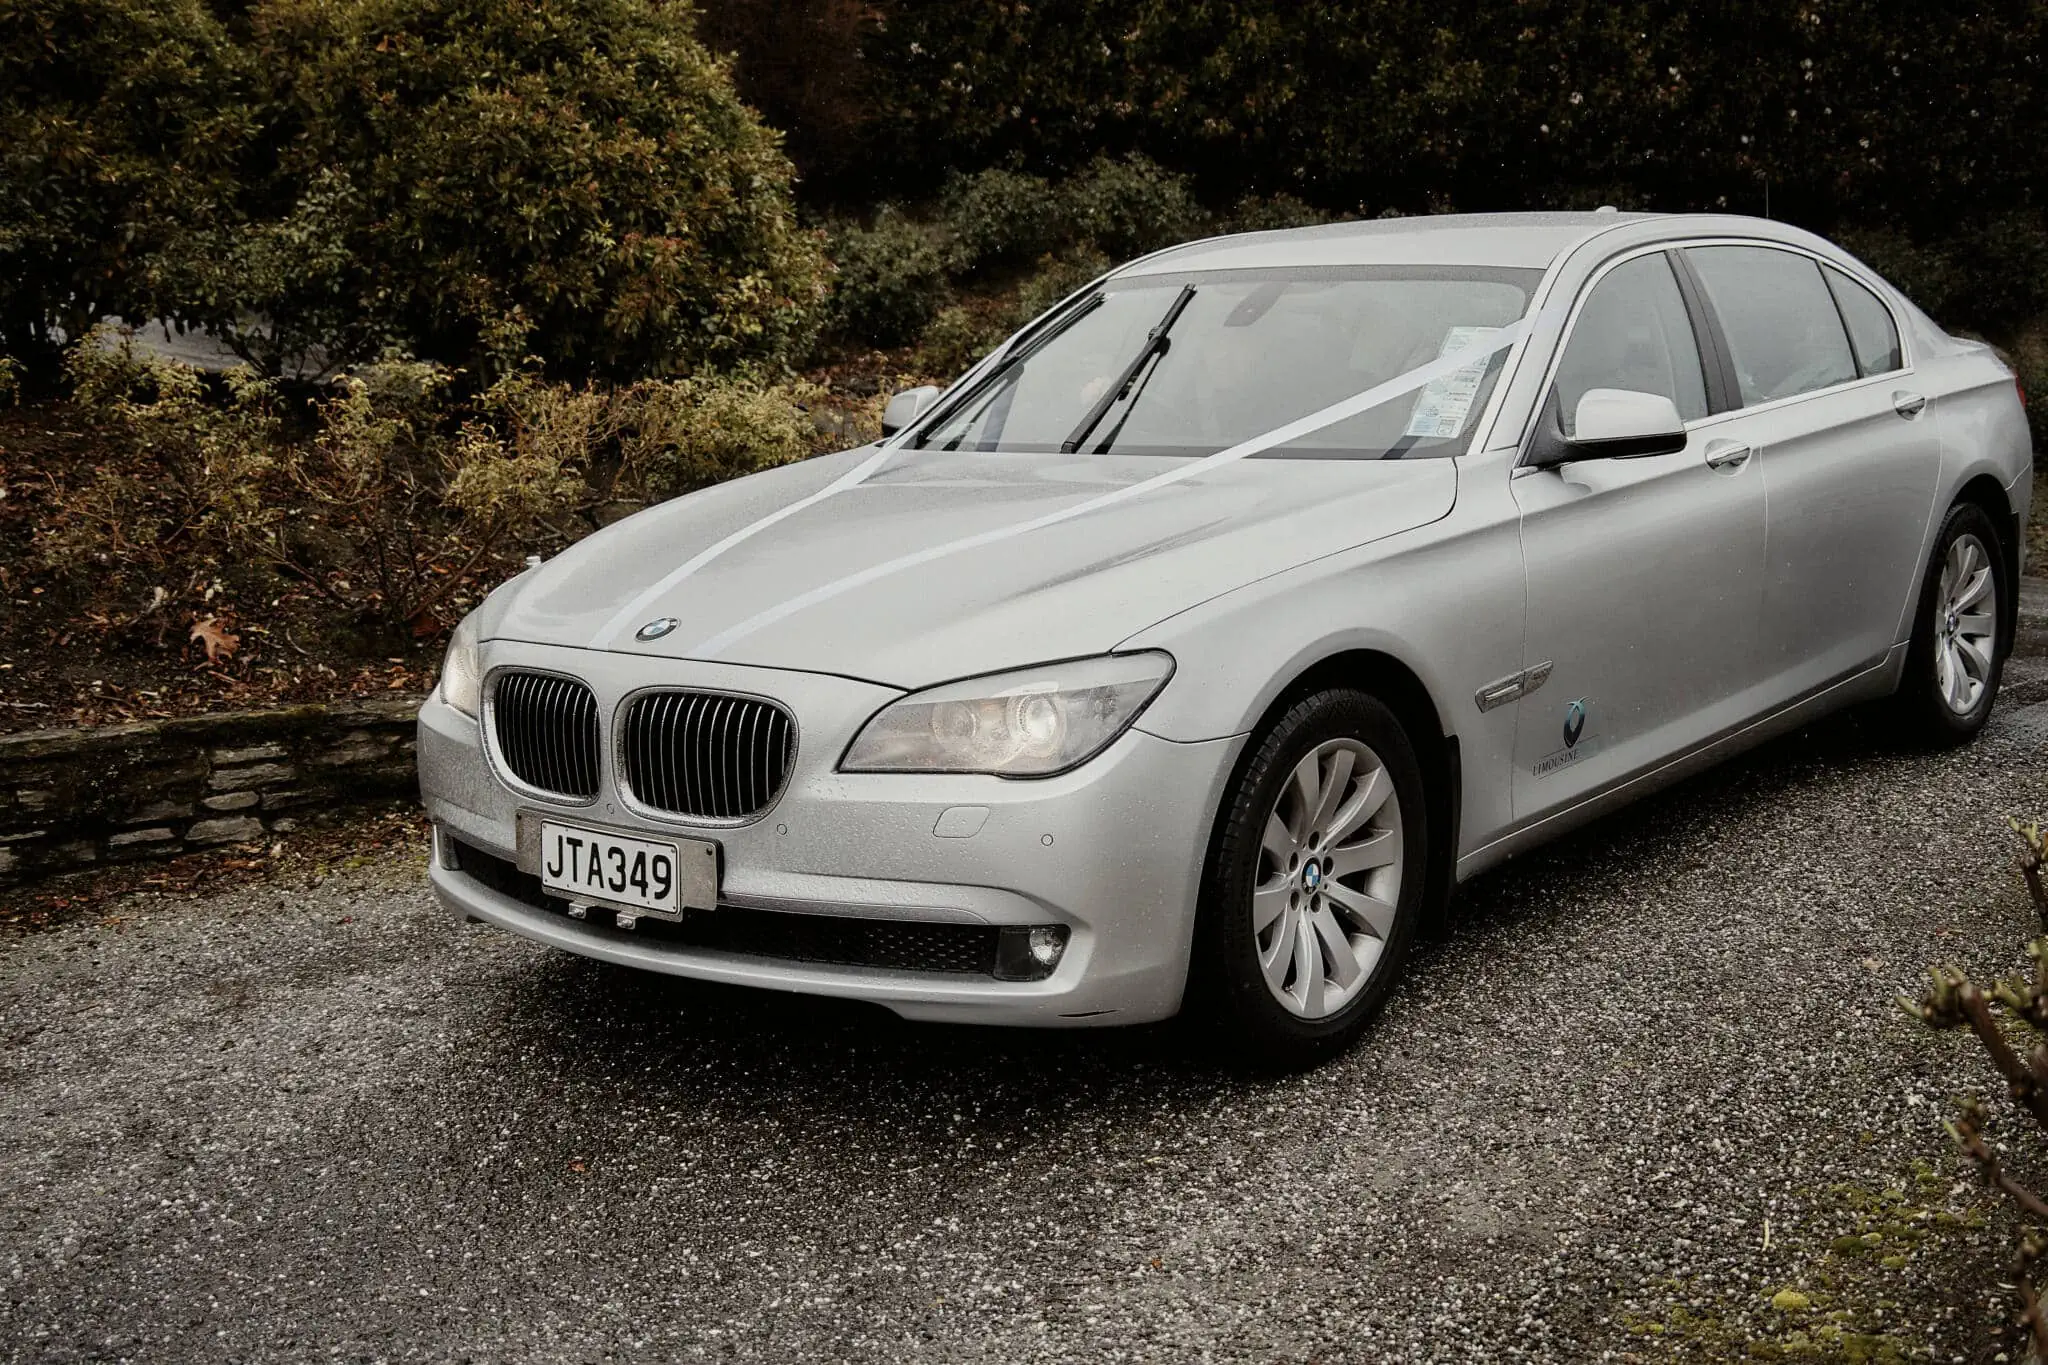 Queenstown New Zealand Elopement Wedding Photographer - A silver BMW 7 Series parked on a gravel road at Wasim and Yumn's Queenstown Islamic Wedding.